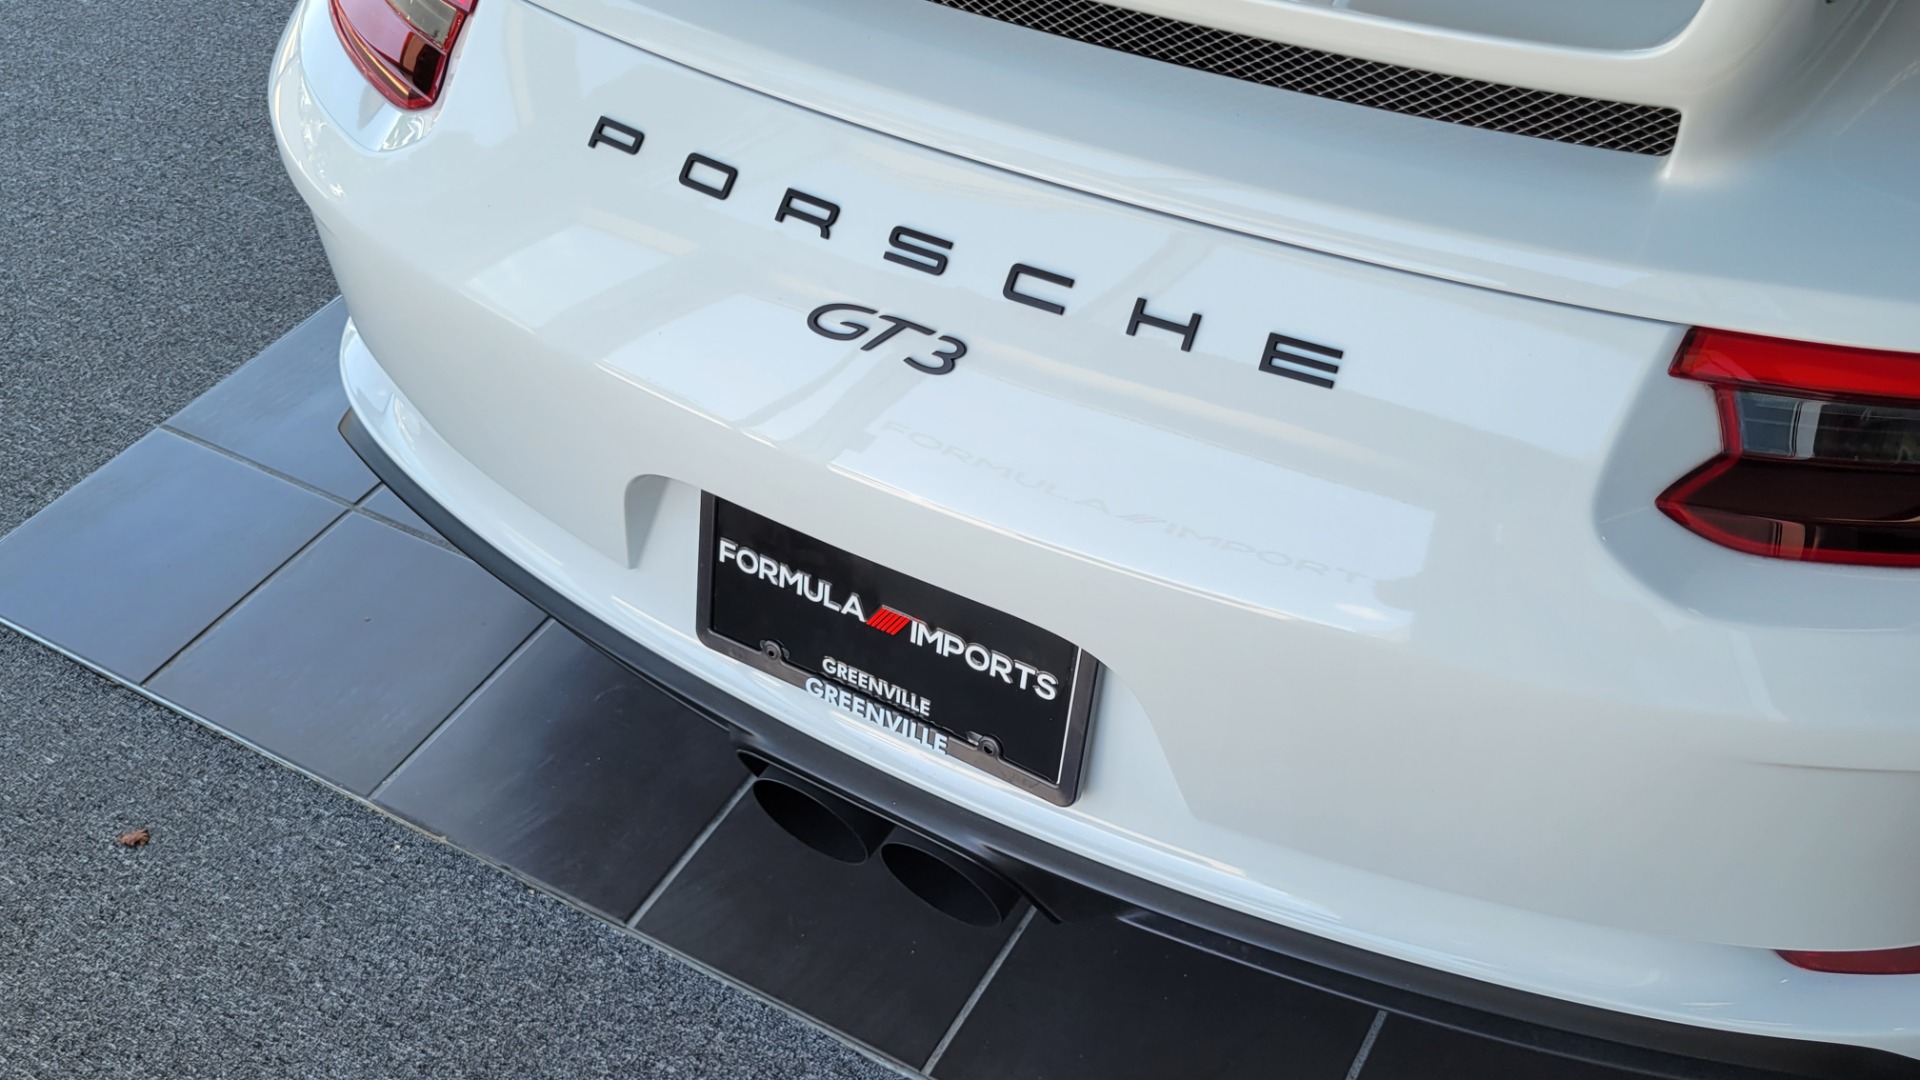 Used 2019 Porsche 911 GT3 4.0L 520HP COUPE / PDK 7-SPD / BOSE / APPLE / REARVIEW for sale $203,995 at Formula Imports in Charlotte NC 28227 11